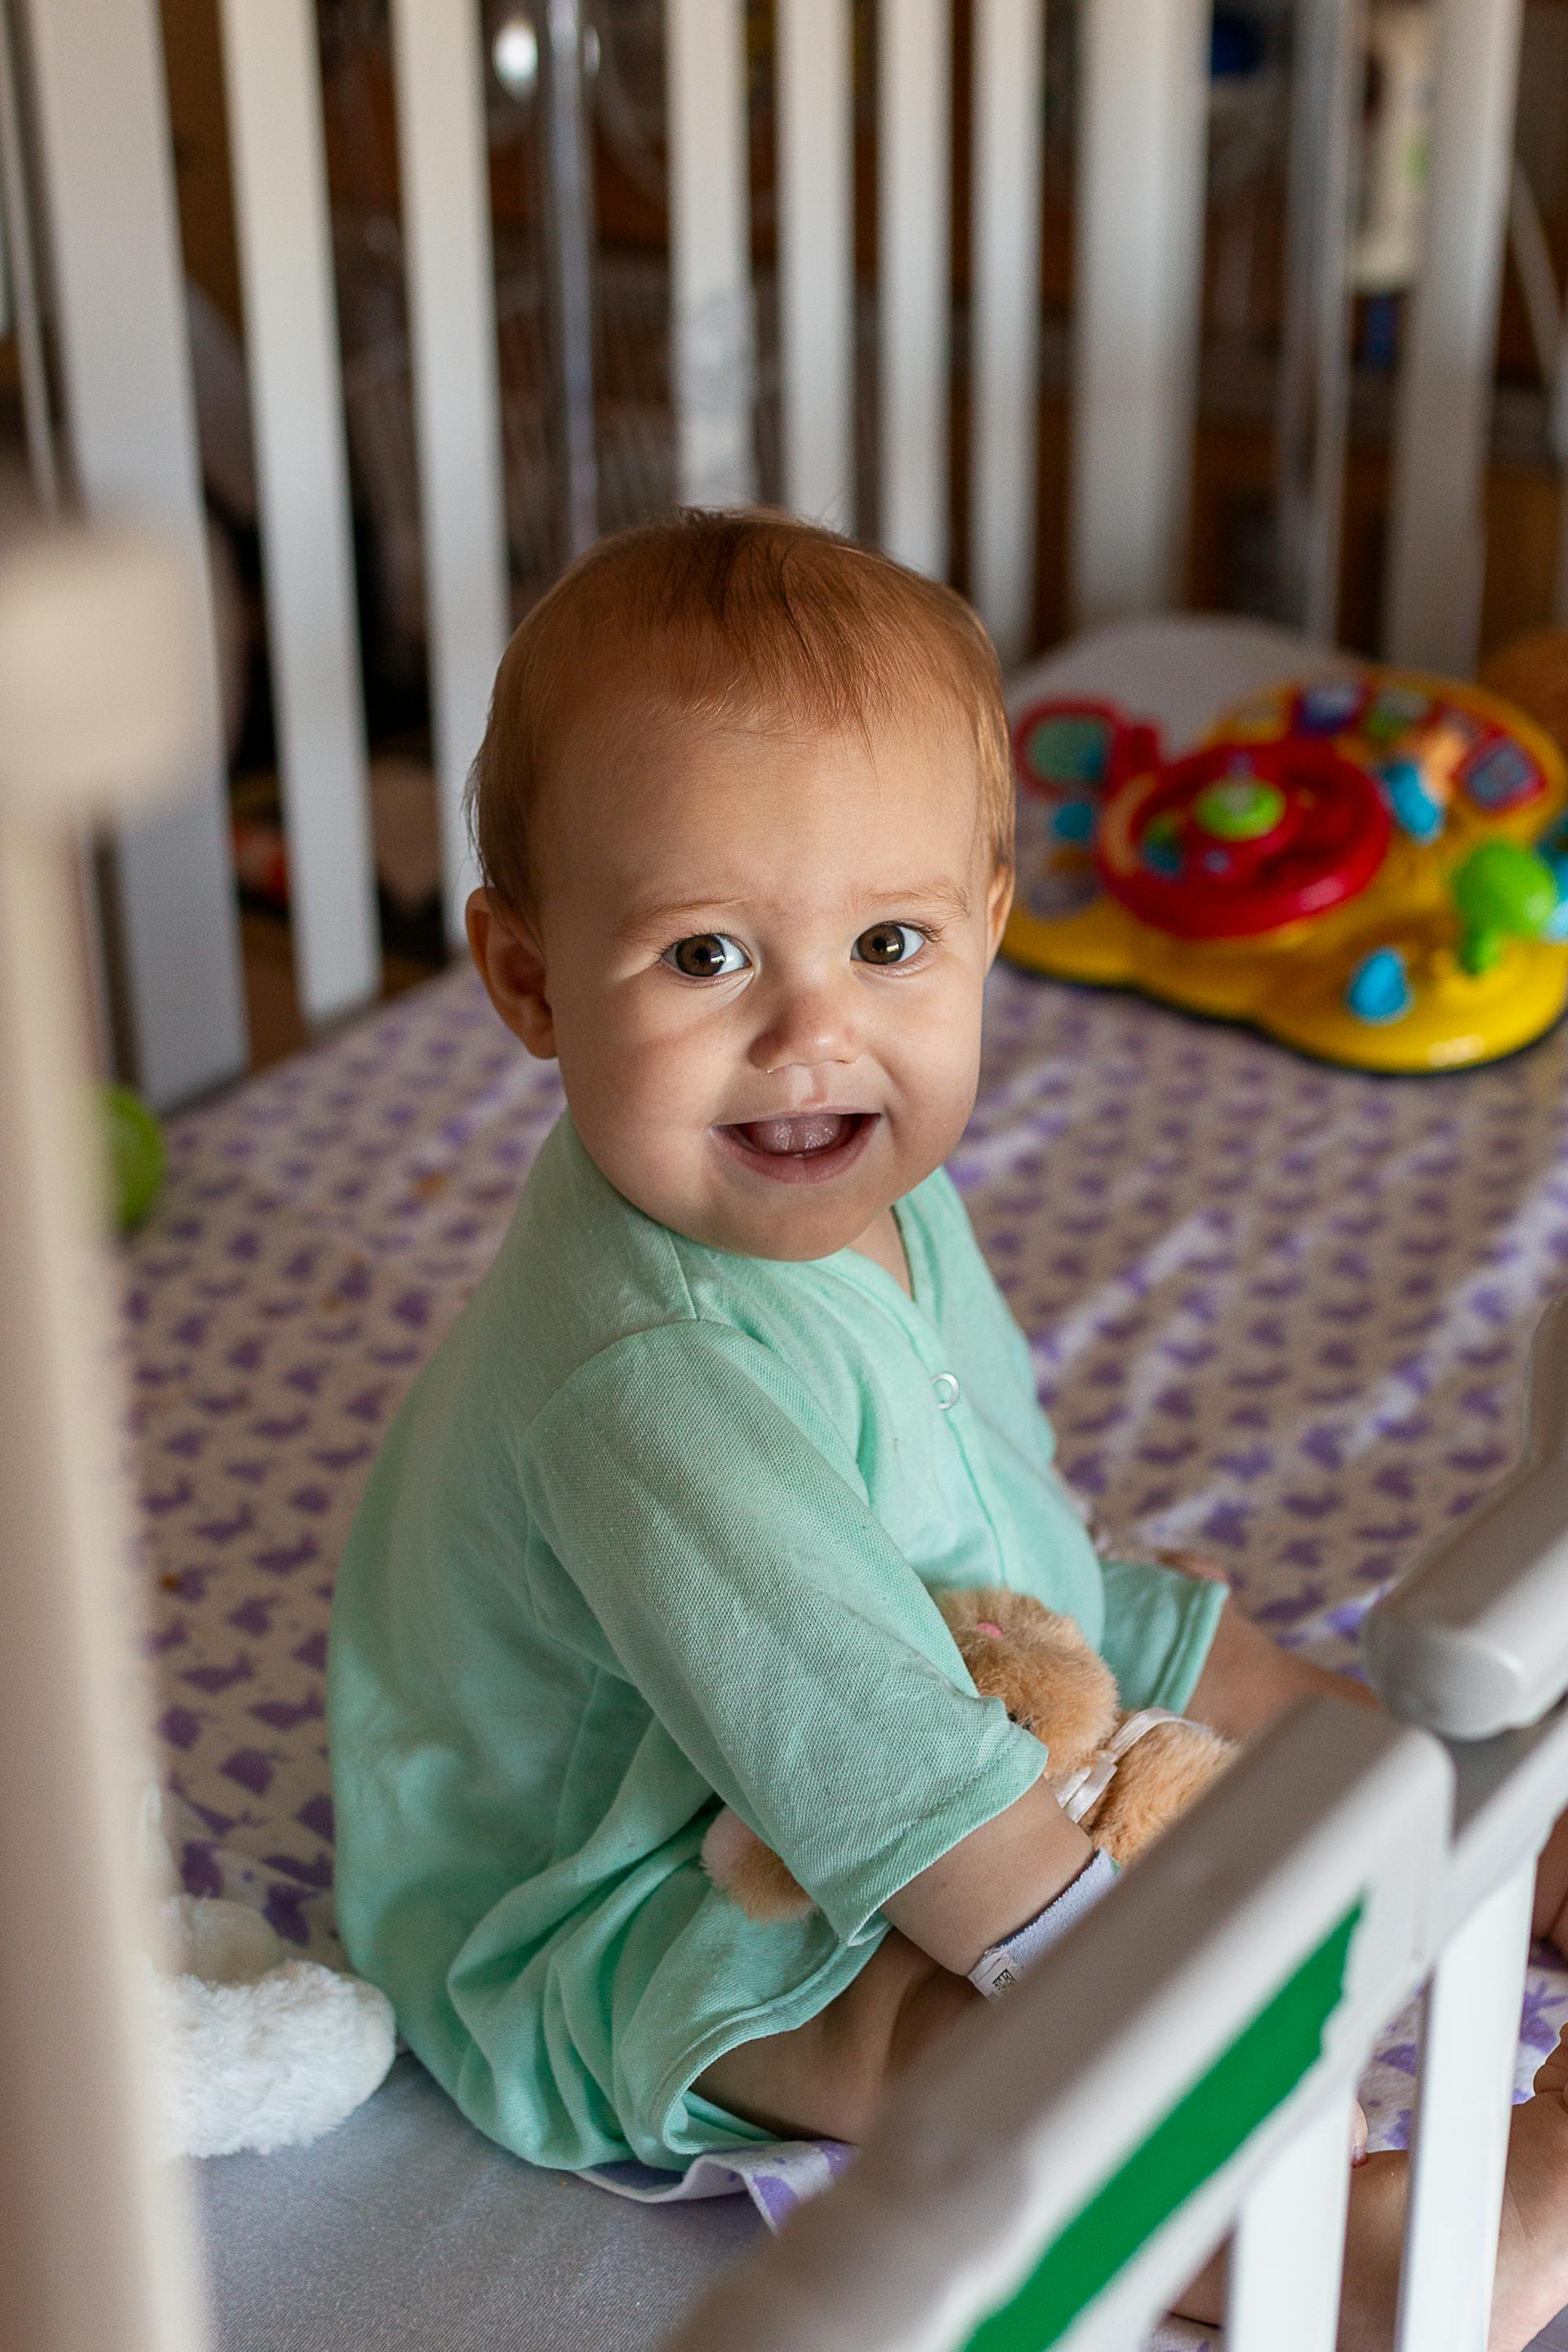 A cute baby sitting in a crib | Source: Pexels